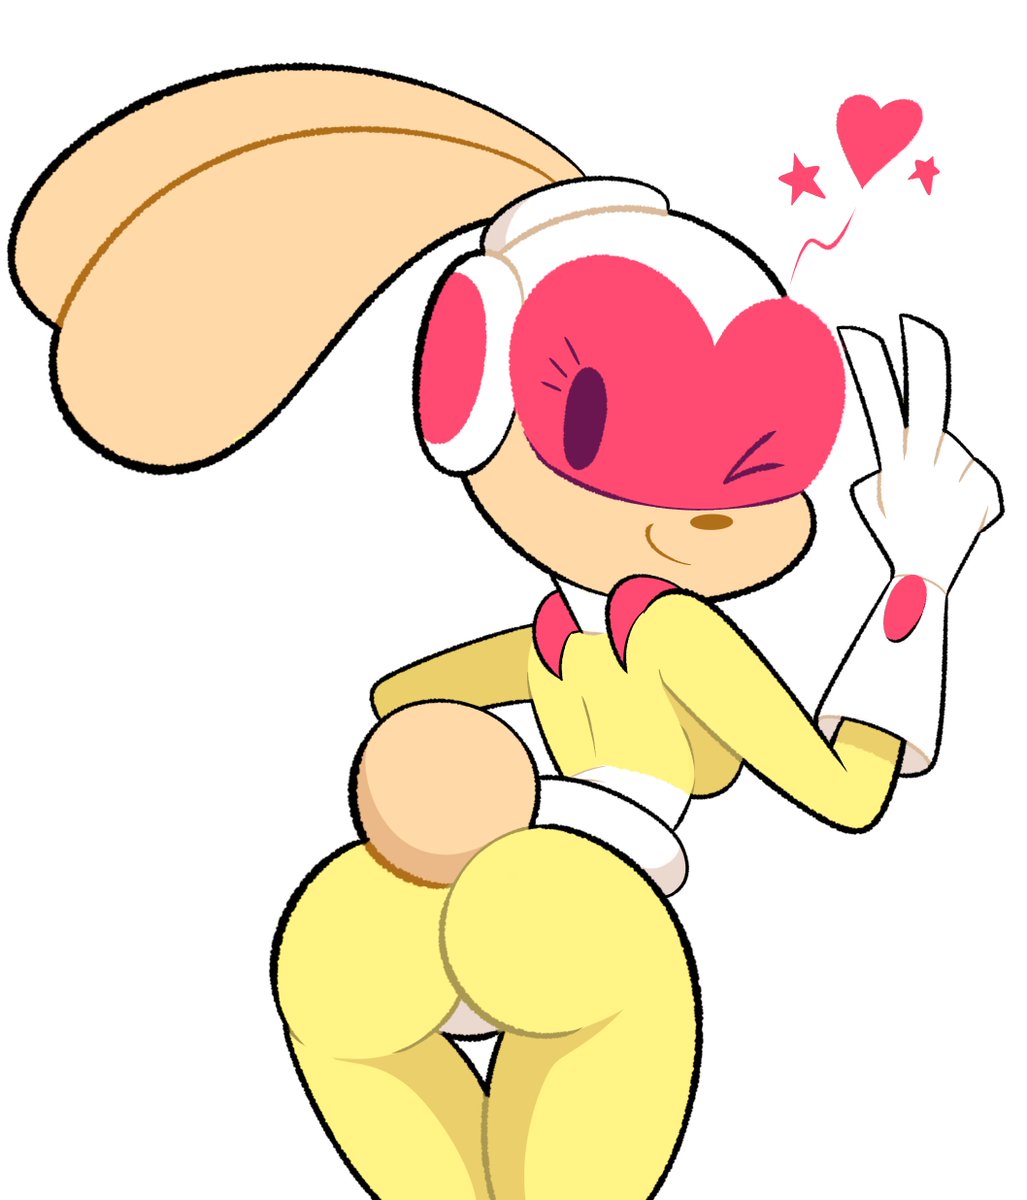 Let introduce my Space Bun, Miss Honeycomb. She's ready fuck monsters, I mean fight